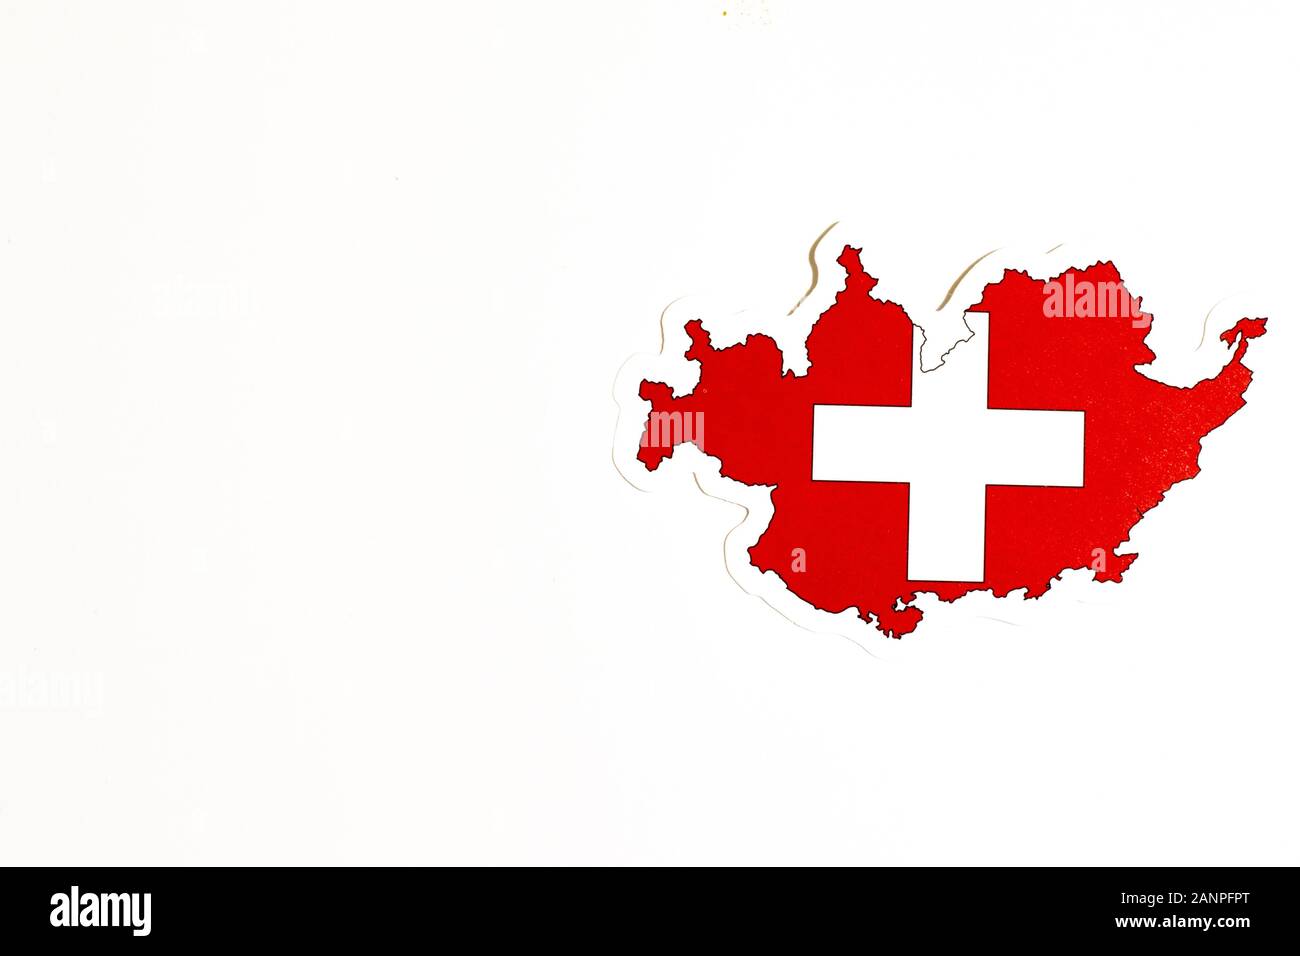 Los Angeles, California, USA - 17 January 2020: National flag of Switzerland. Country outline on white background with copy space. Politics Stock Photo